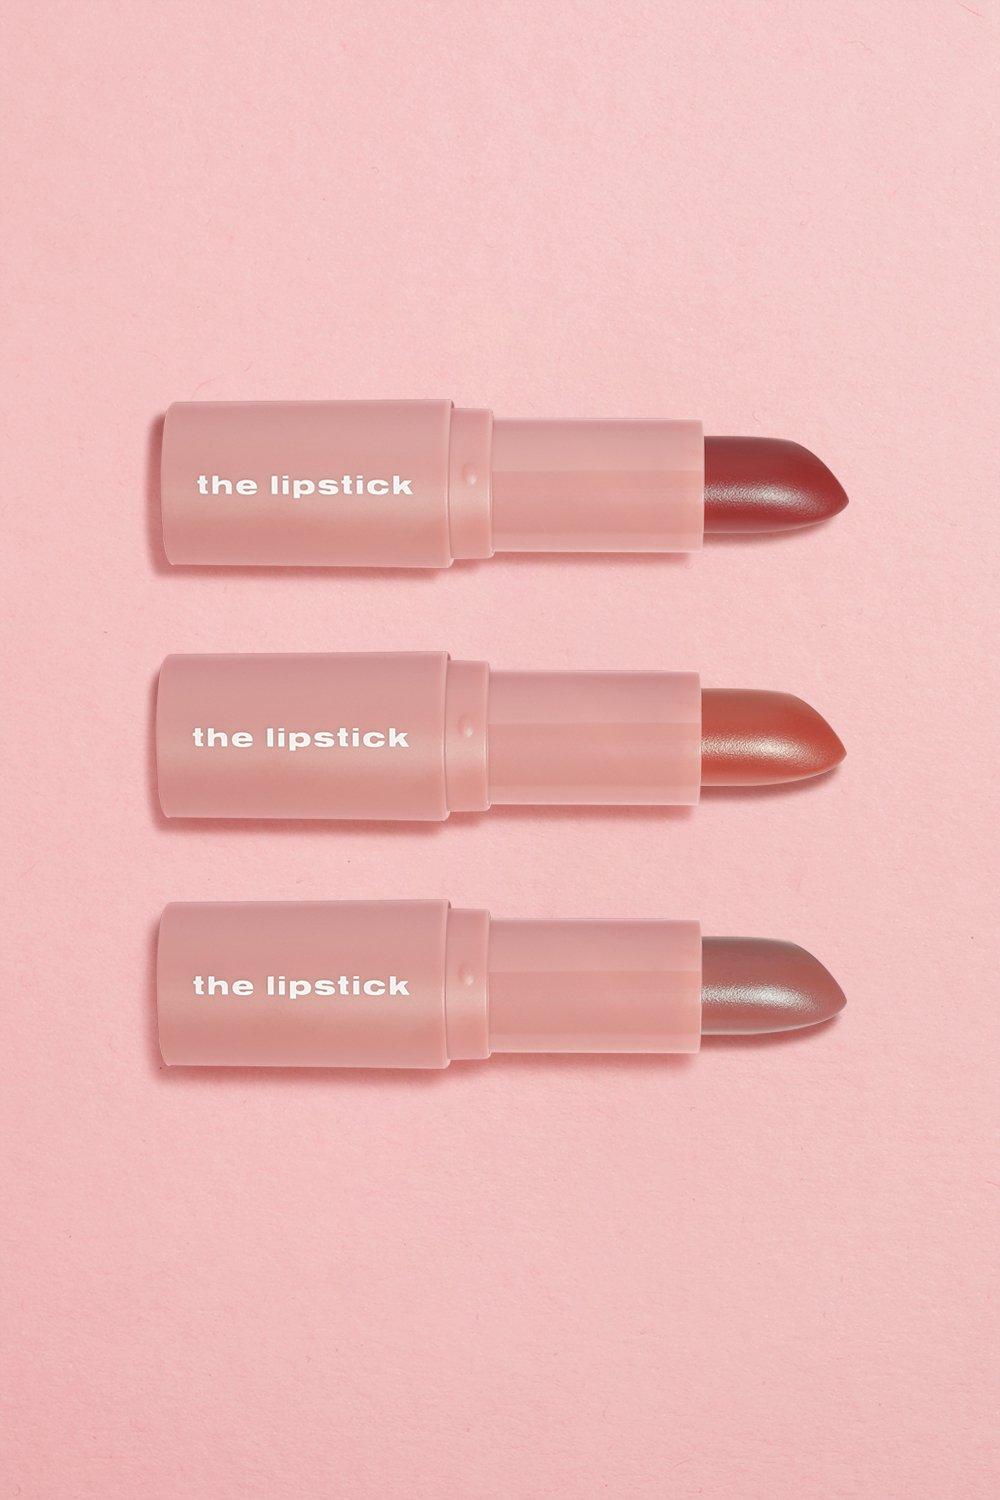 Boohoo Beauty The Lipstick Edit - Brown  - Size: ONE SIZE